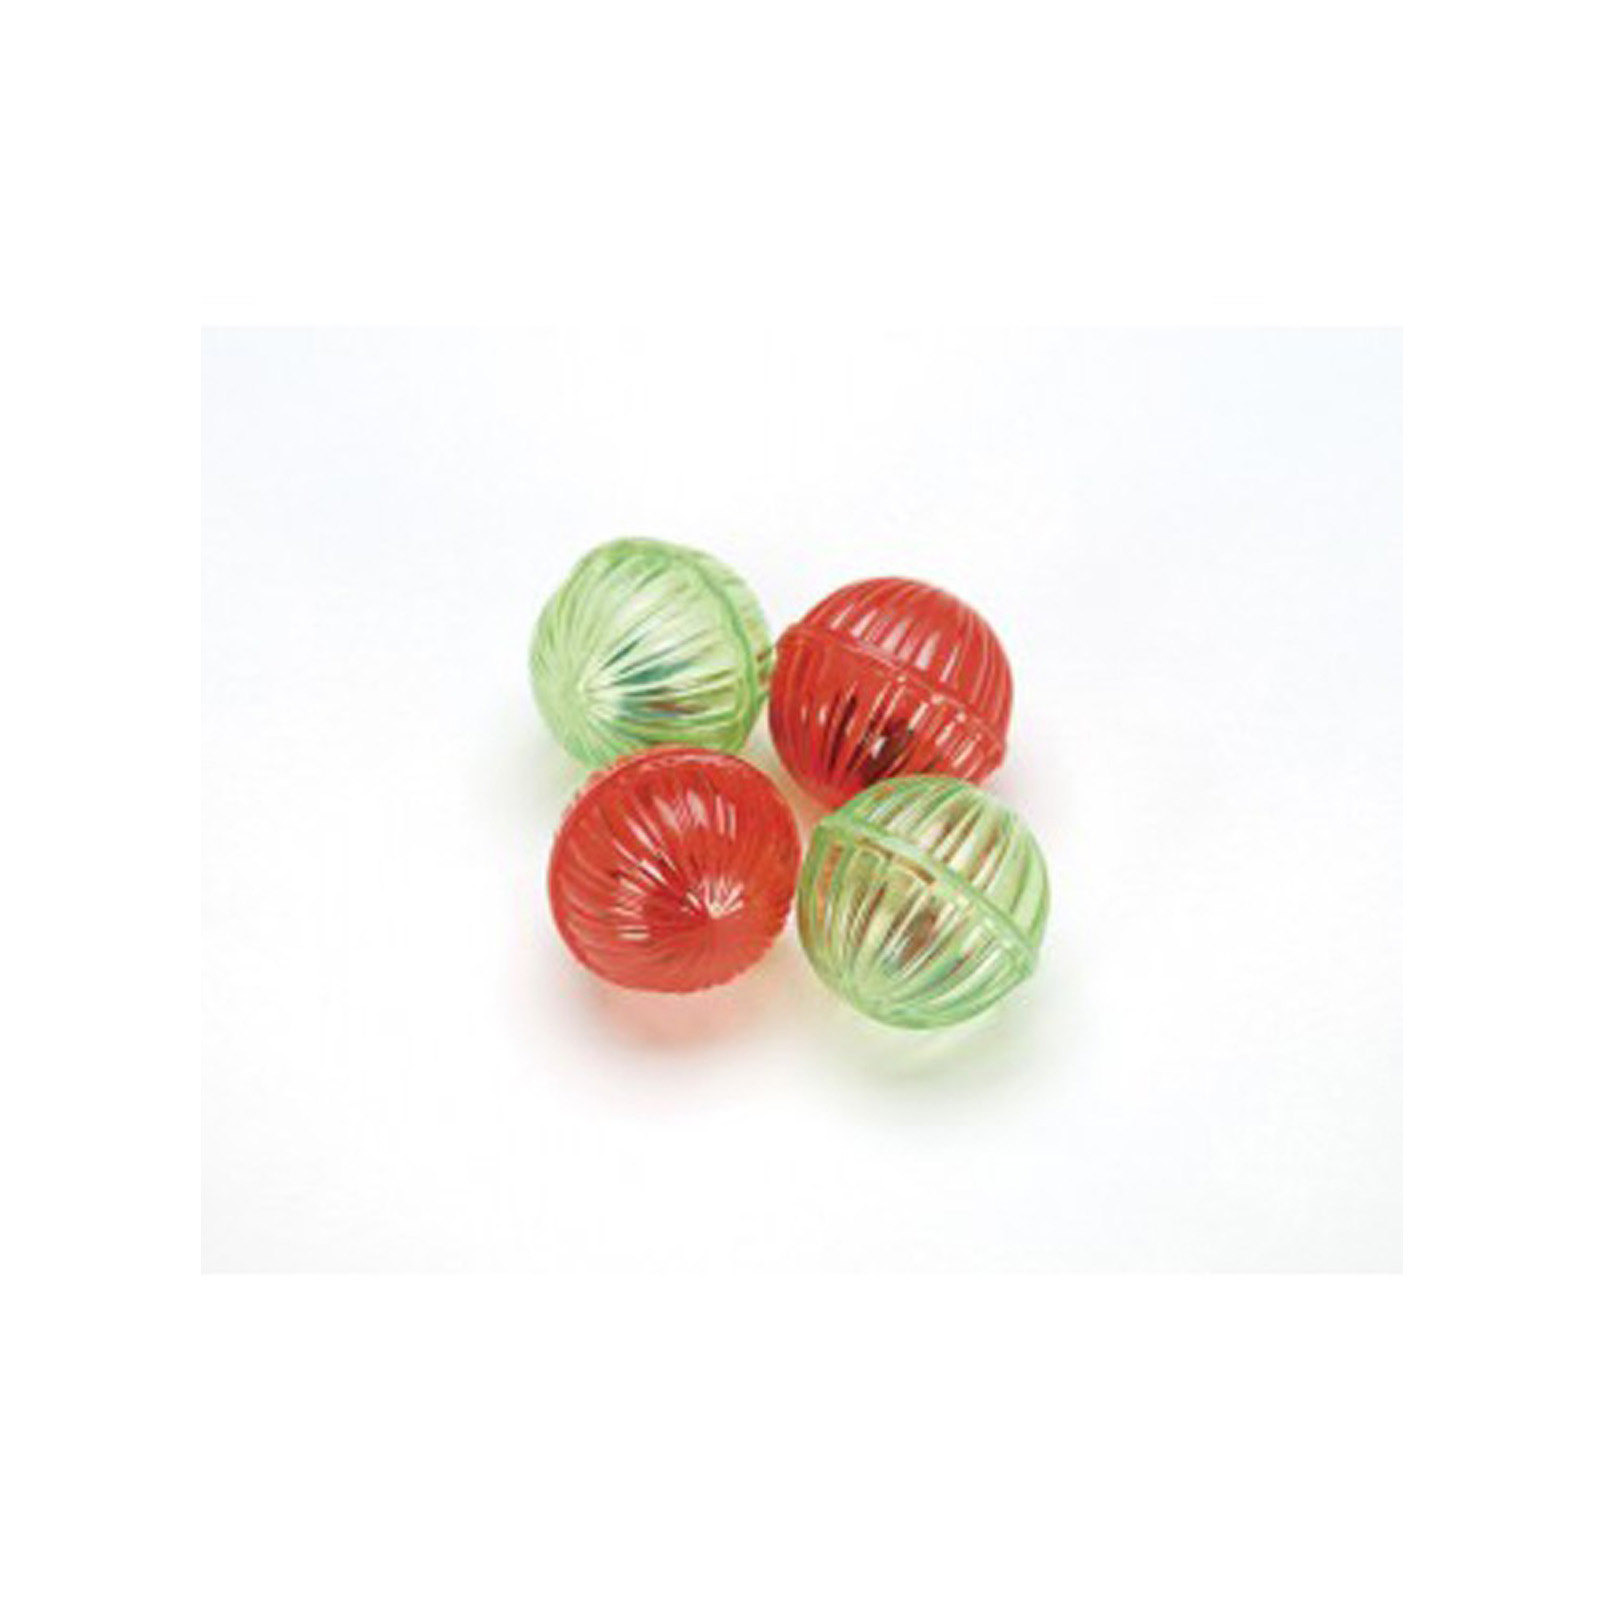 Ethical Products Inc. Toy Shimmer Ball 4 pk.